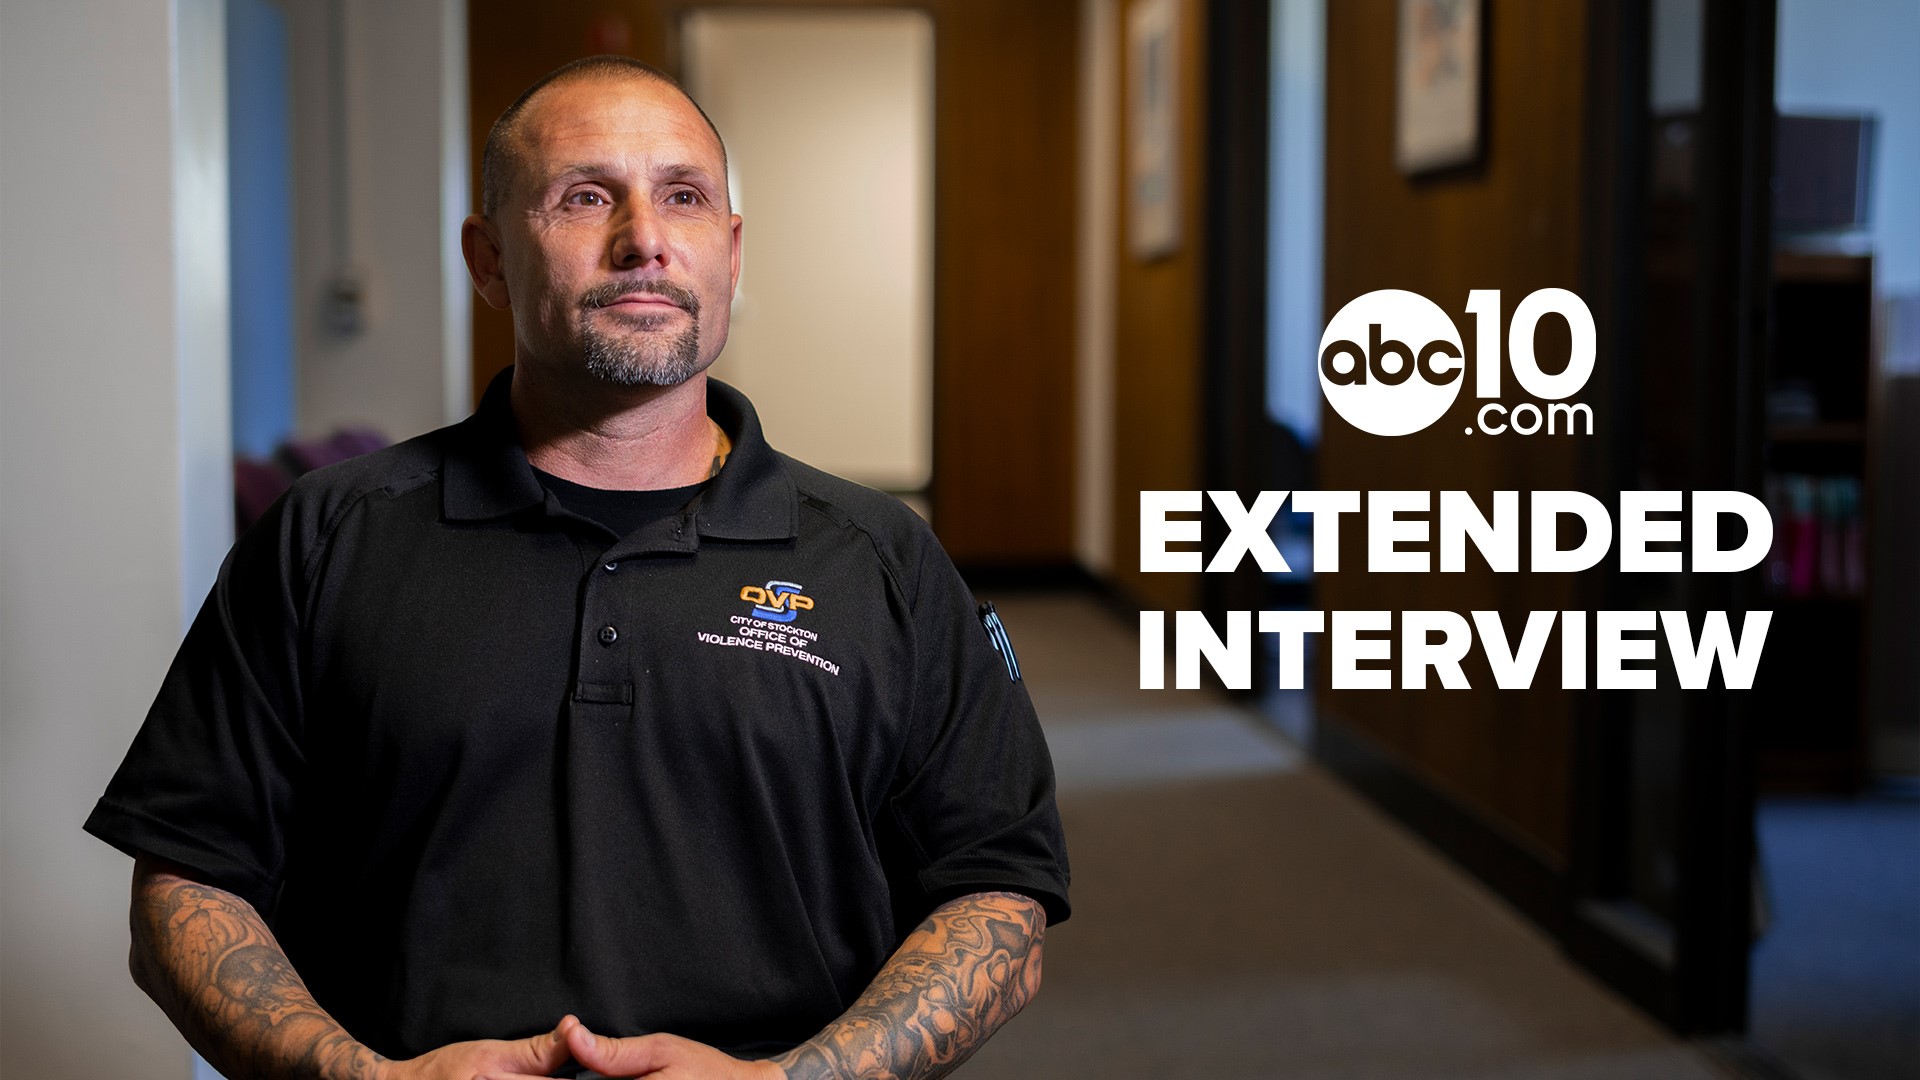 Robert Mosqueda, outreach supervisor for the City of Stockton's Office of Violence Prevention, talks about his journey from prison to peacekeeper, and how he hopes to impact Stockton's murder rate.